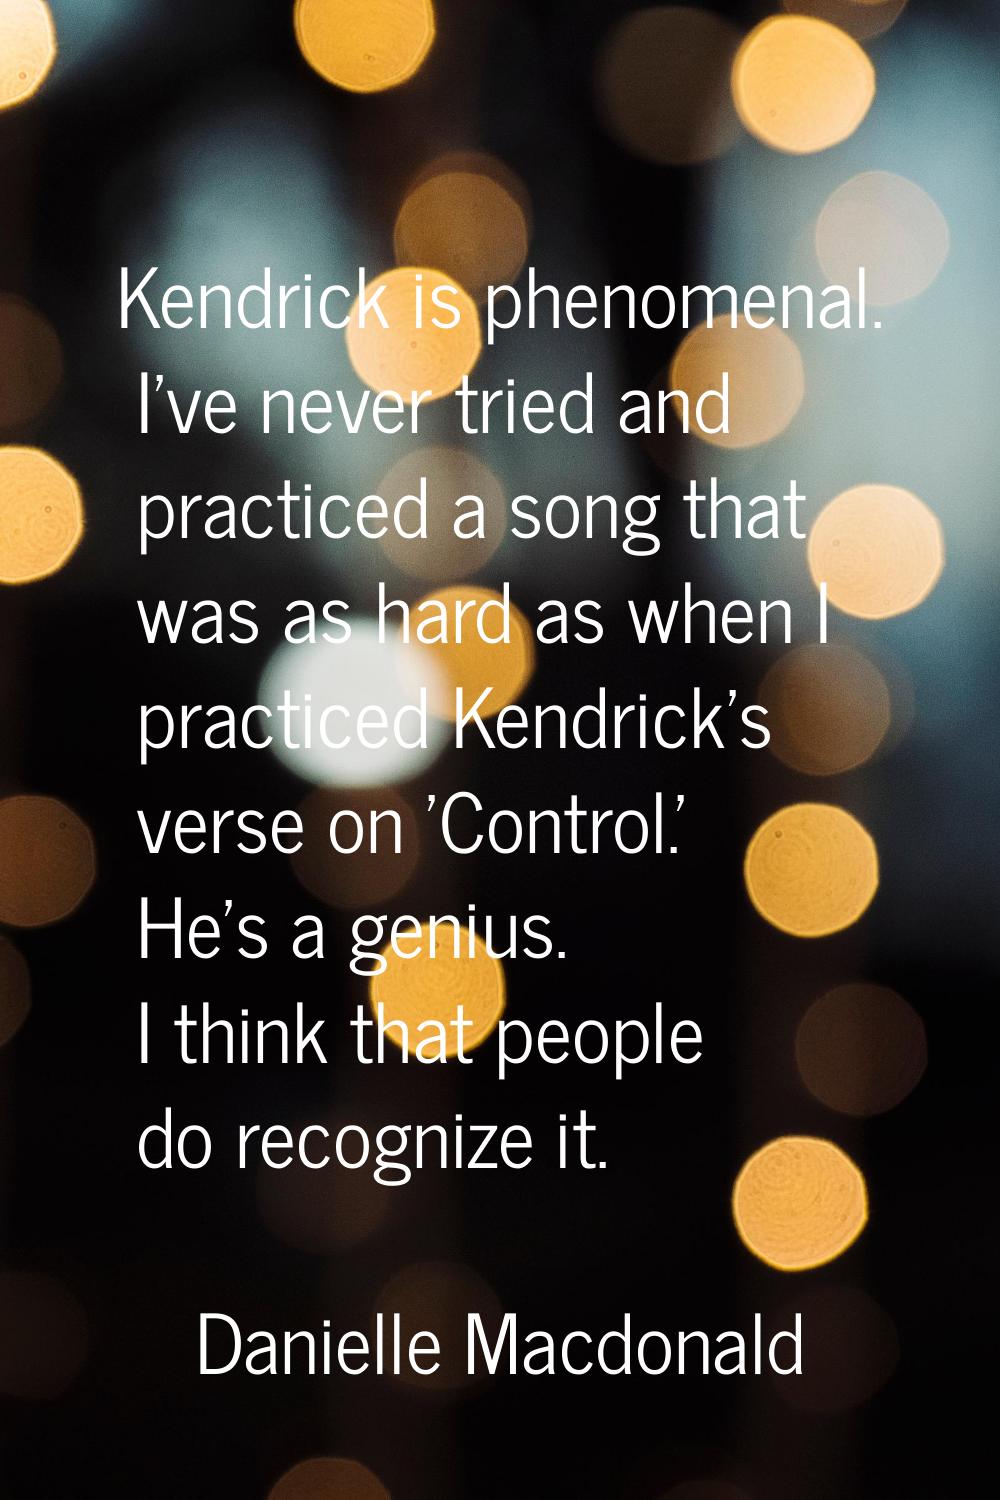 Kendrick is phenomenal. I've never tried and practiced a song that was as hard as when I practiced 